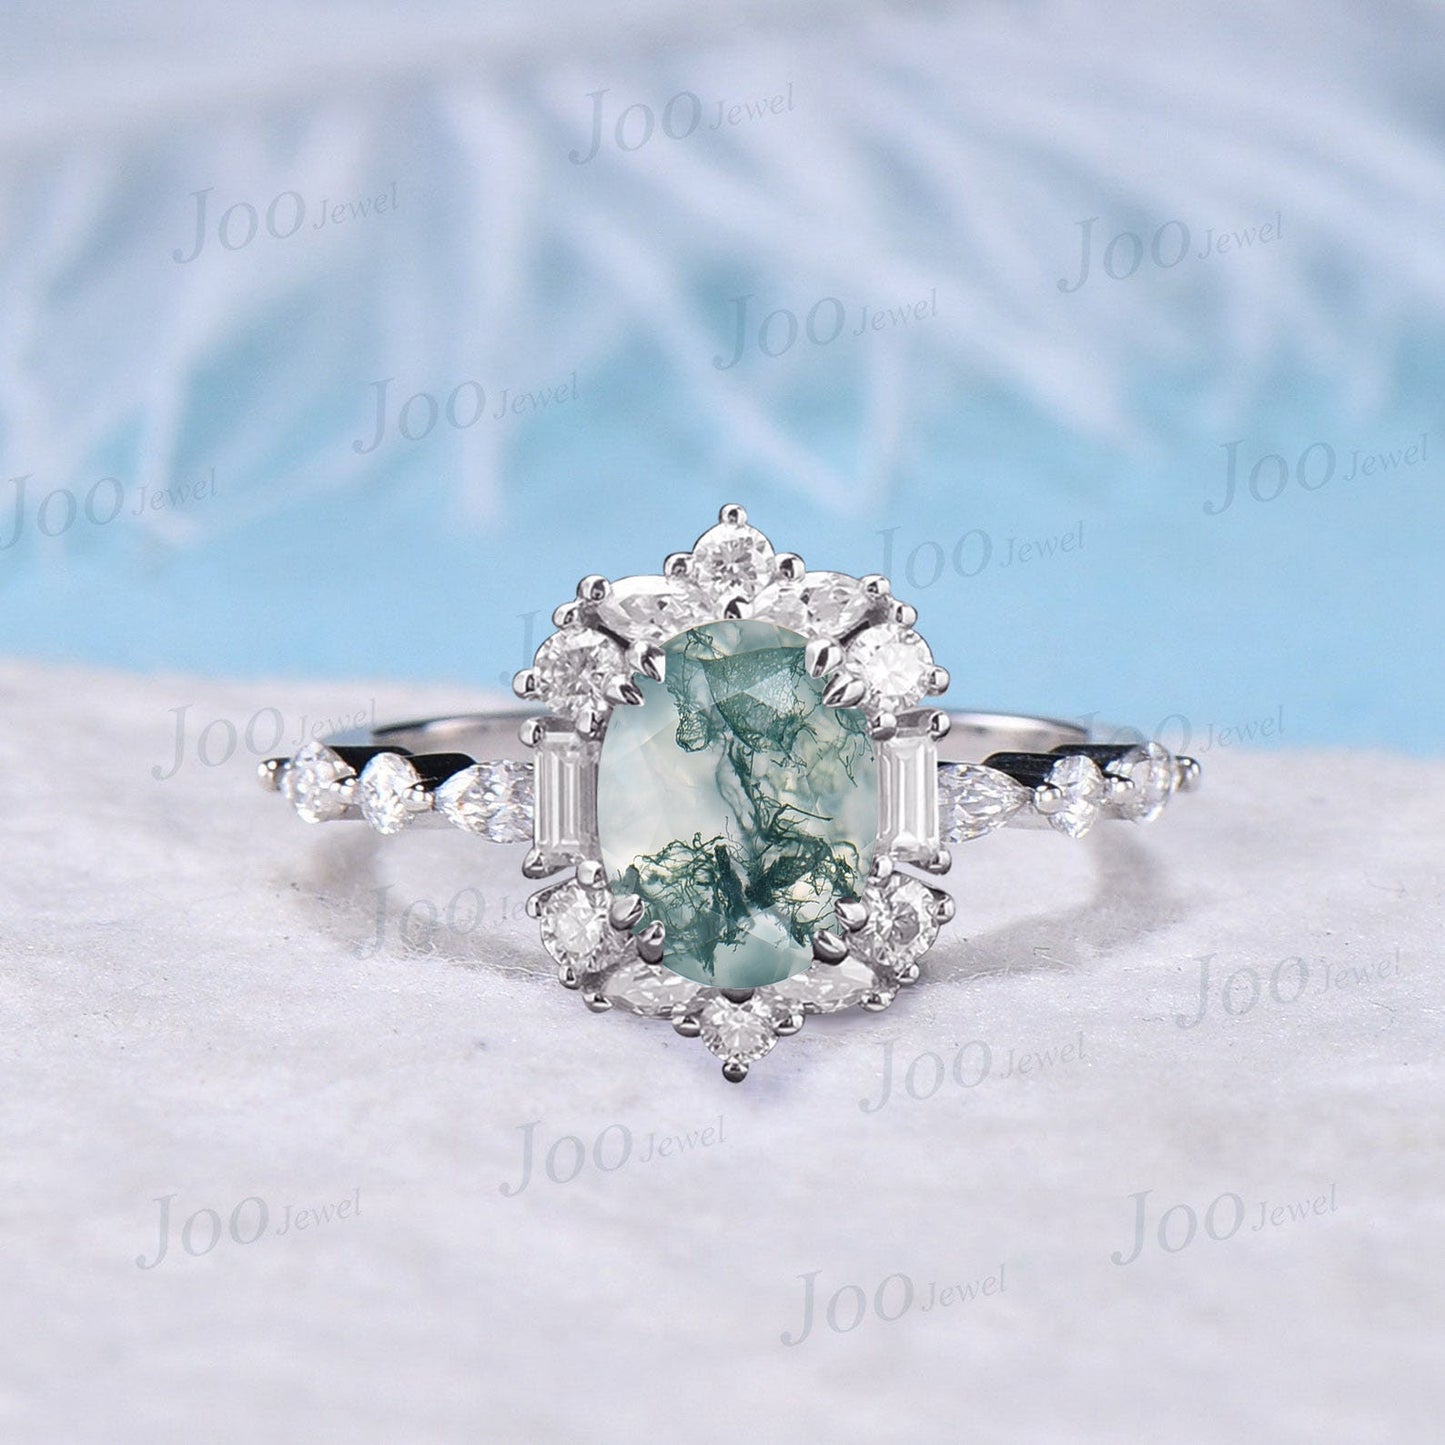 Oval Cut Natural Moss Agate Halo Engagement Rings 14k White Gold Cluster Aquatic Agate Promise Ring Half Eternity Moissanite Wedding Ring